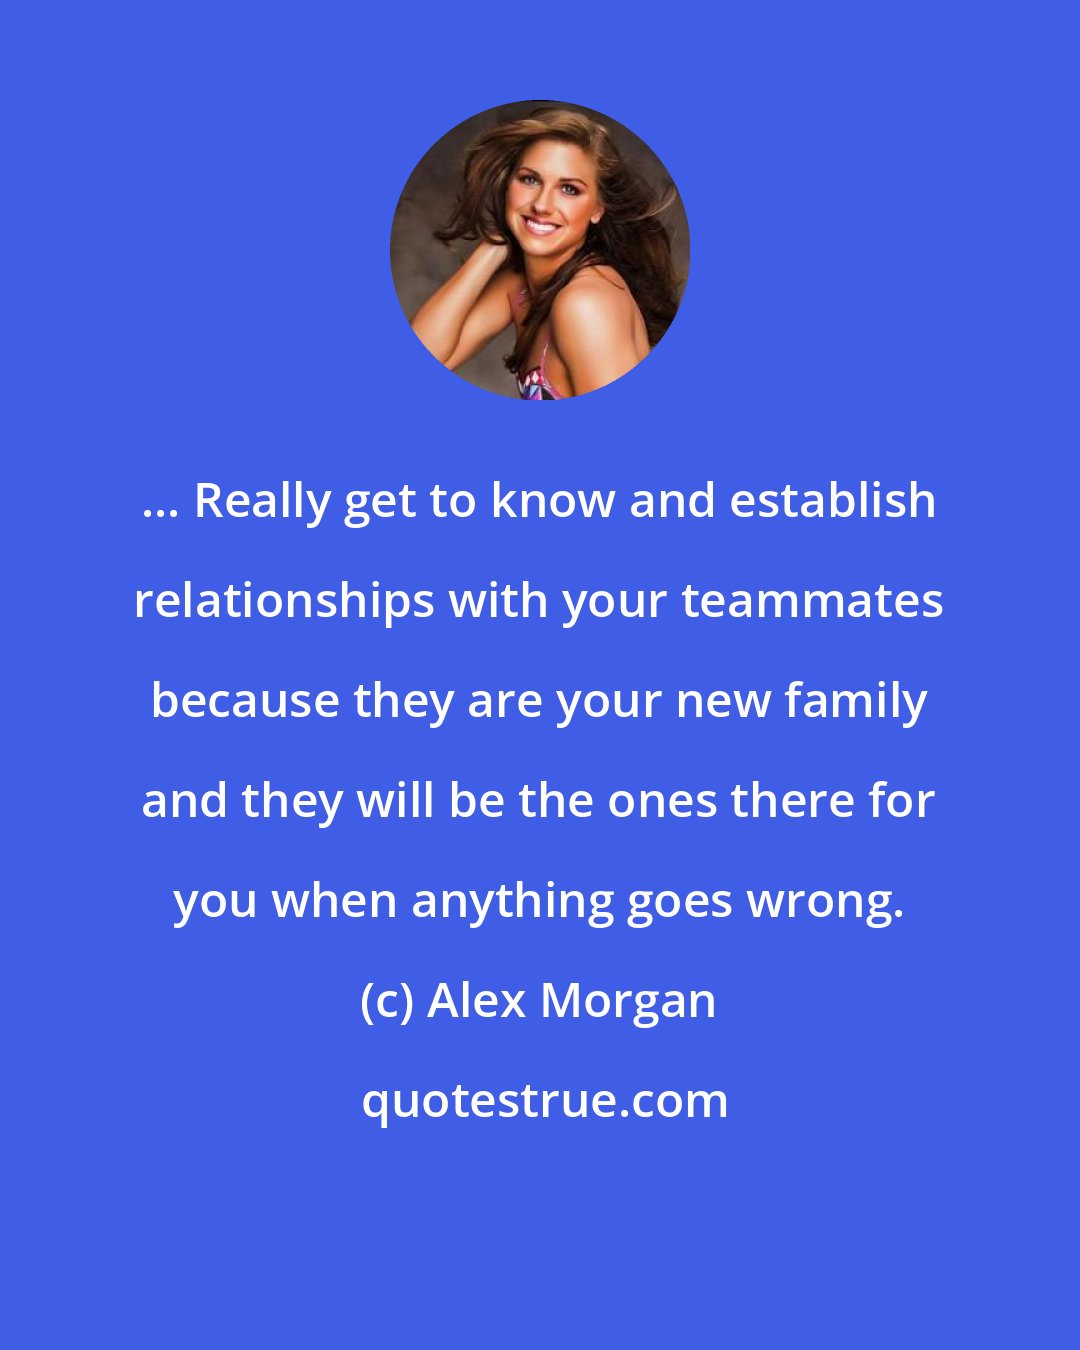 Alex Morgan: ... Really get to know and establish relationships with your teammates because they are your new family and they will be the ones there for you when anything goes wrong.